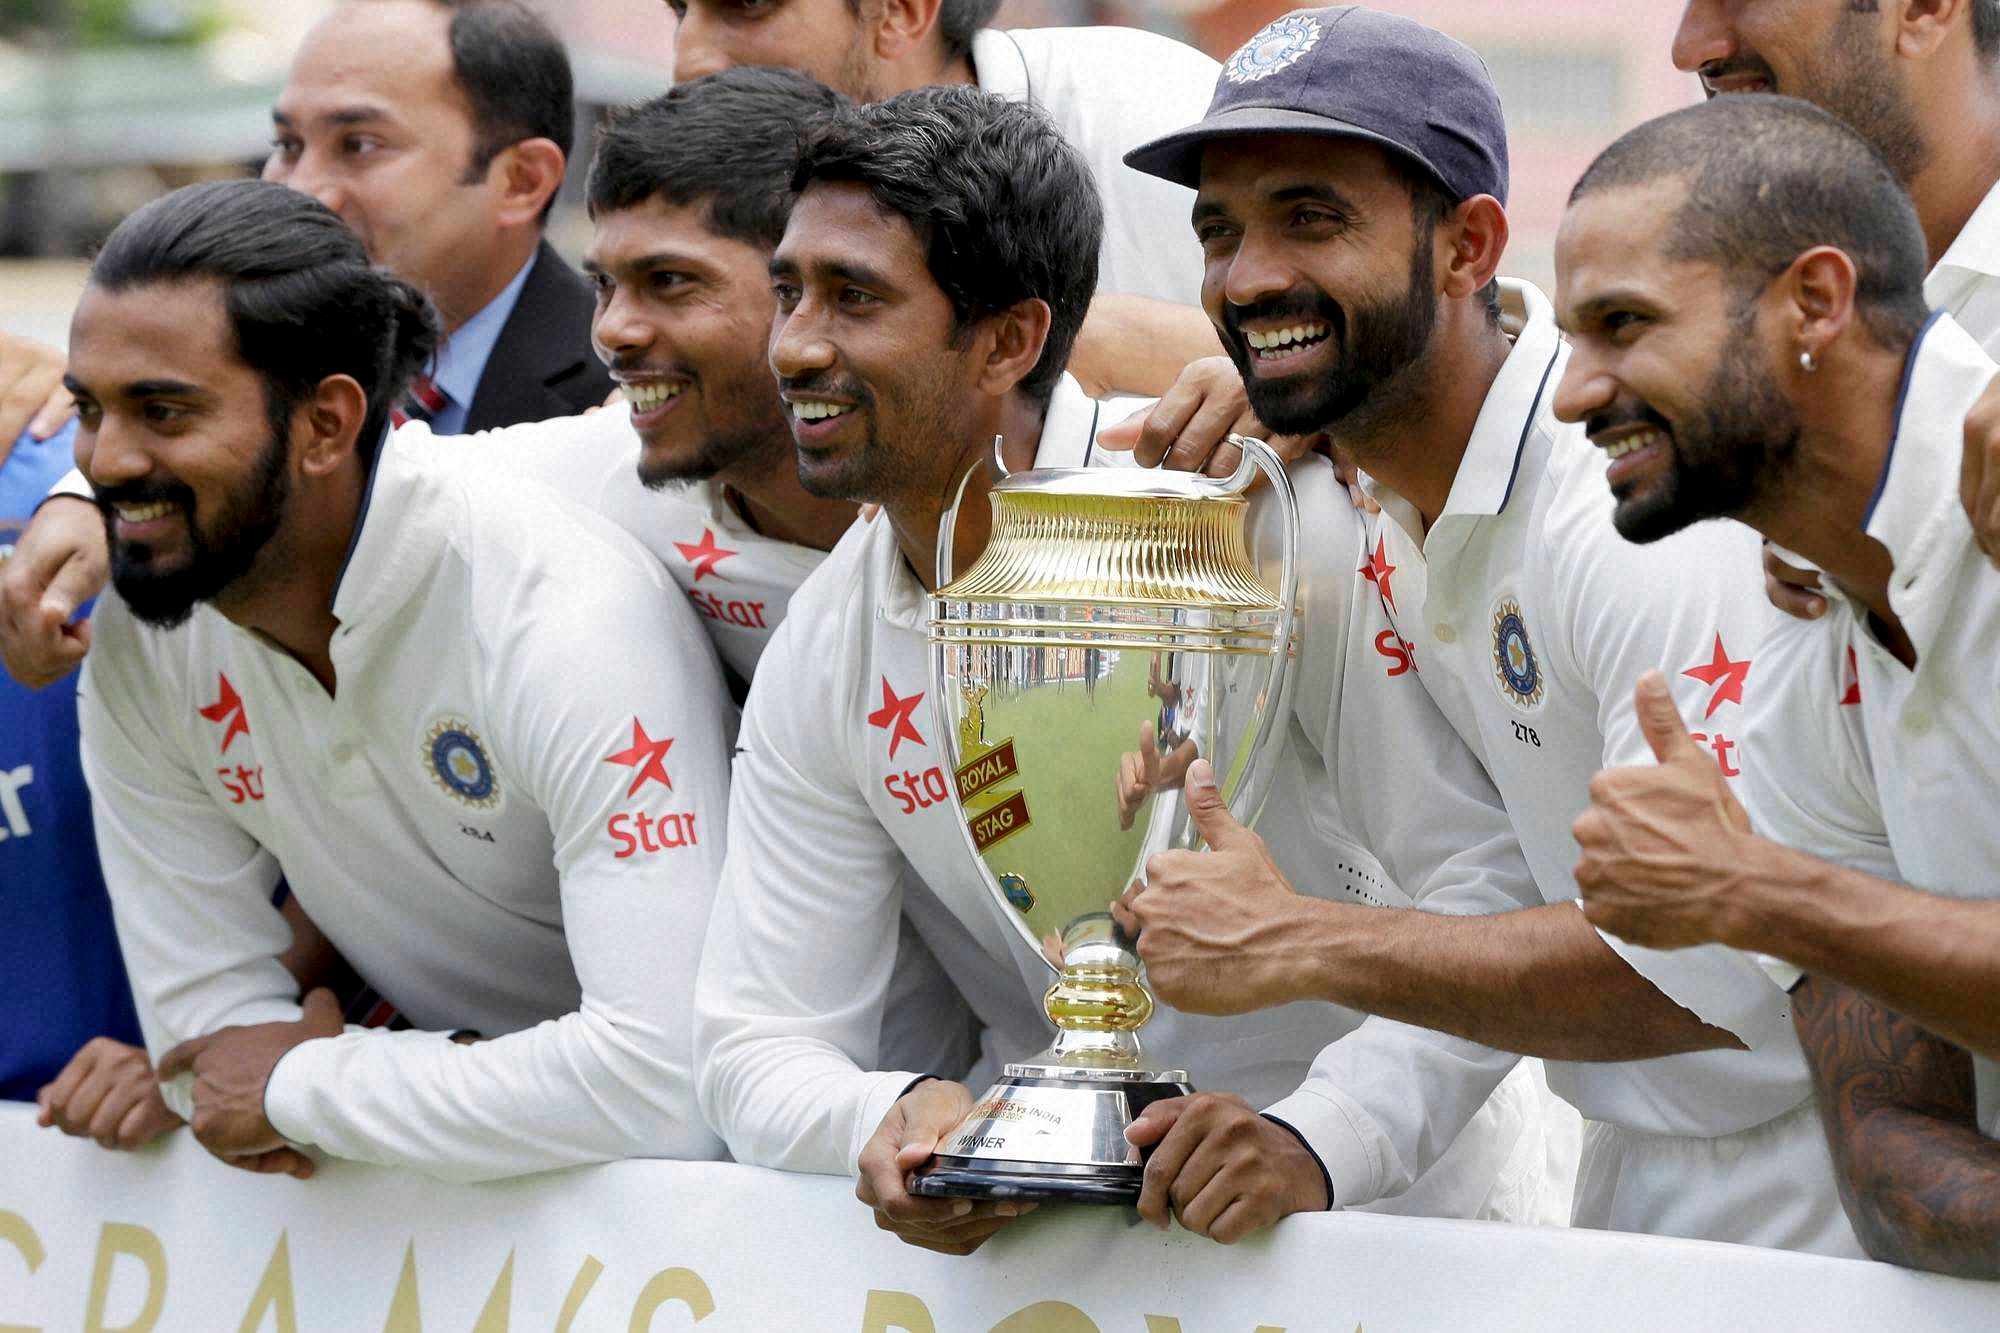 Indian cricketers, from left to right, Lokesh Rahul, Umesh Yadav, Wriddhiman Saha, Ajinkya Rahane and Shikhar Dhawan celebrate with the trophy during the award ceremony for the Test match series Royal Stag Cup at the Queen's Park Oval in Port-of-Spain, Trinidad, Monday, Aug. 22, 2016. India beat West Indies 2-0 in the series. AP/PTI